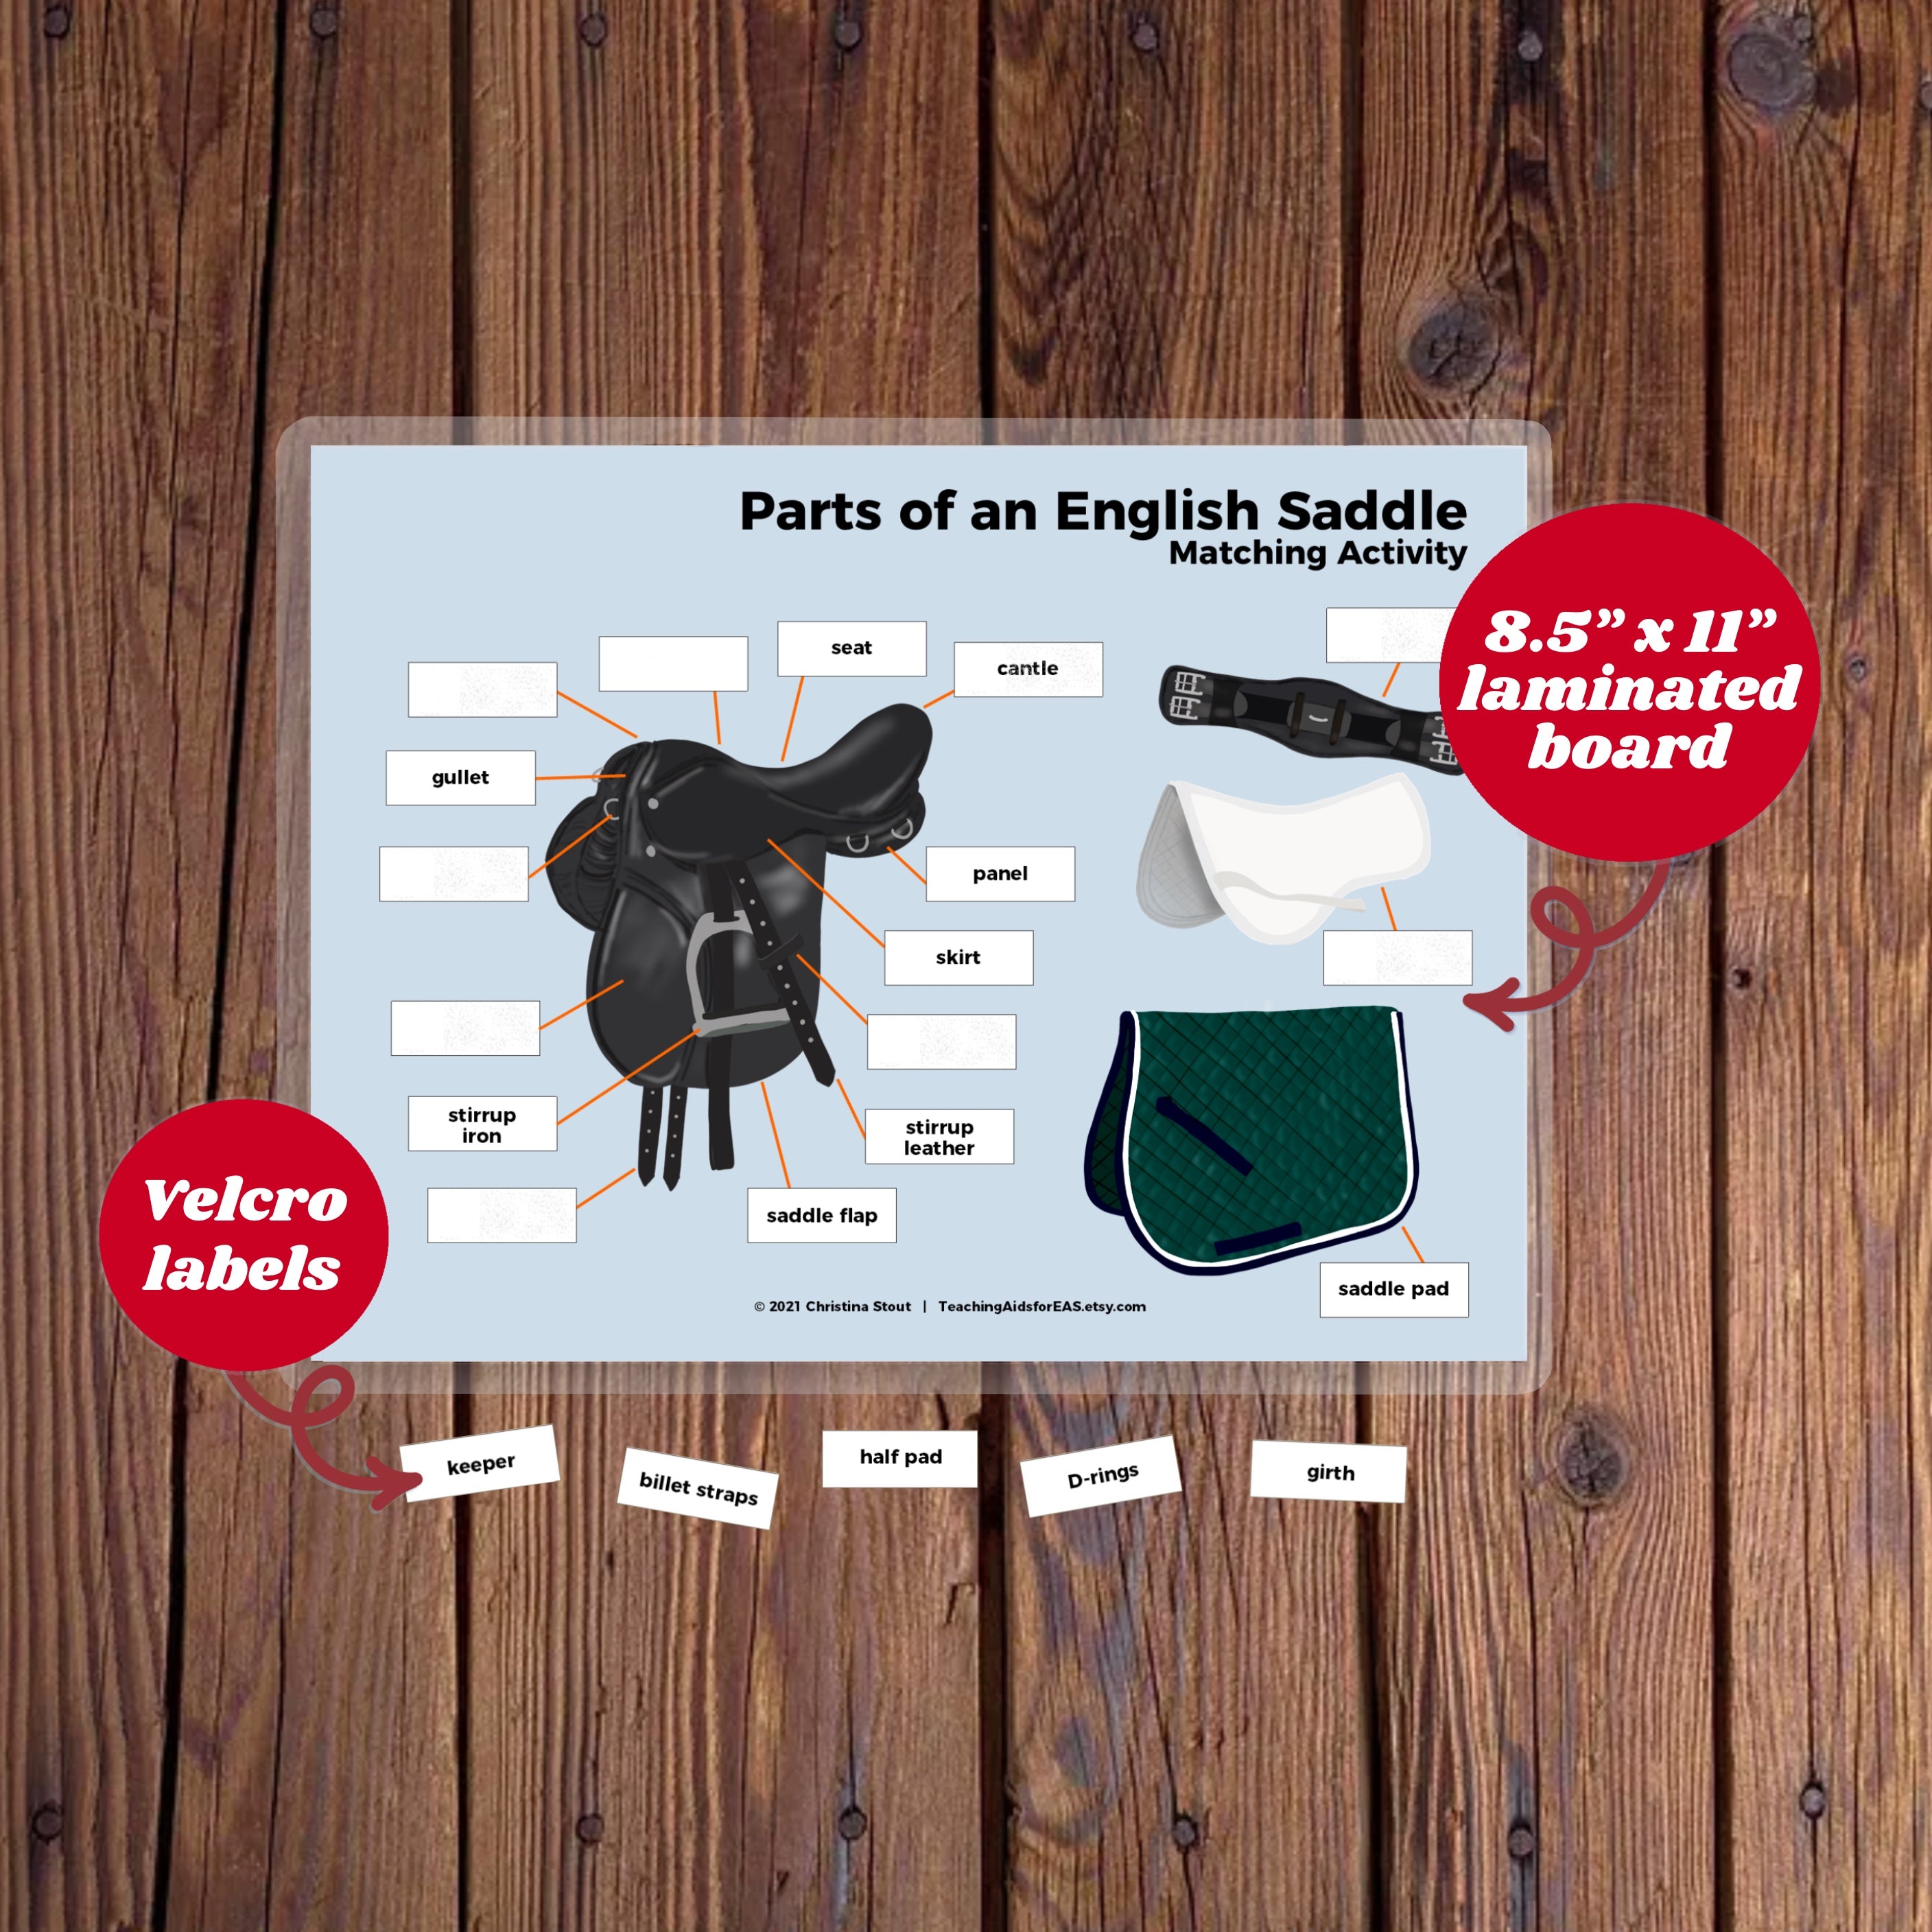 velcro board, parts of the horse – Teaching Aids for EAS